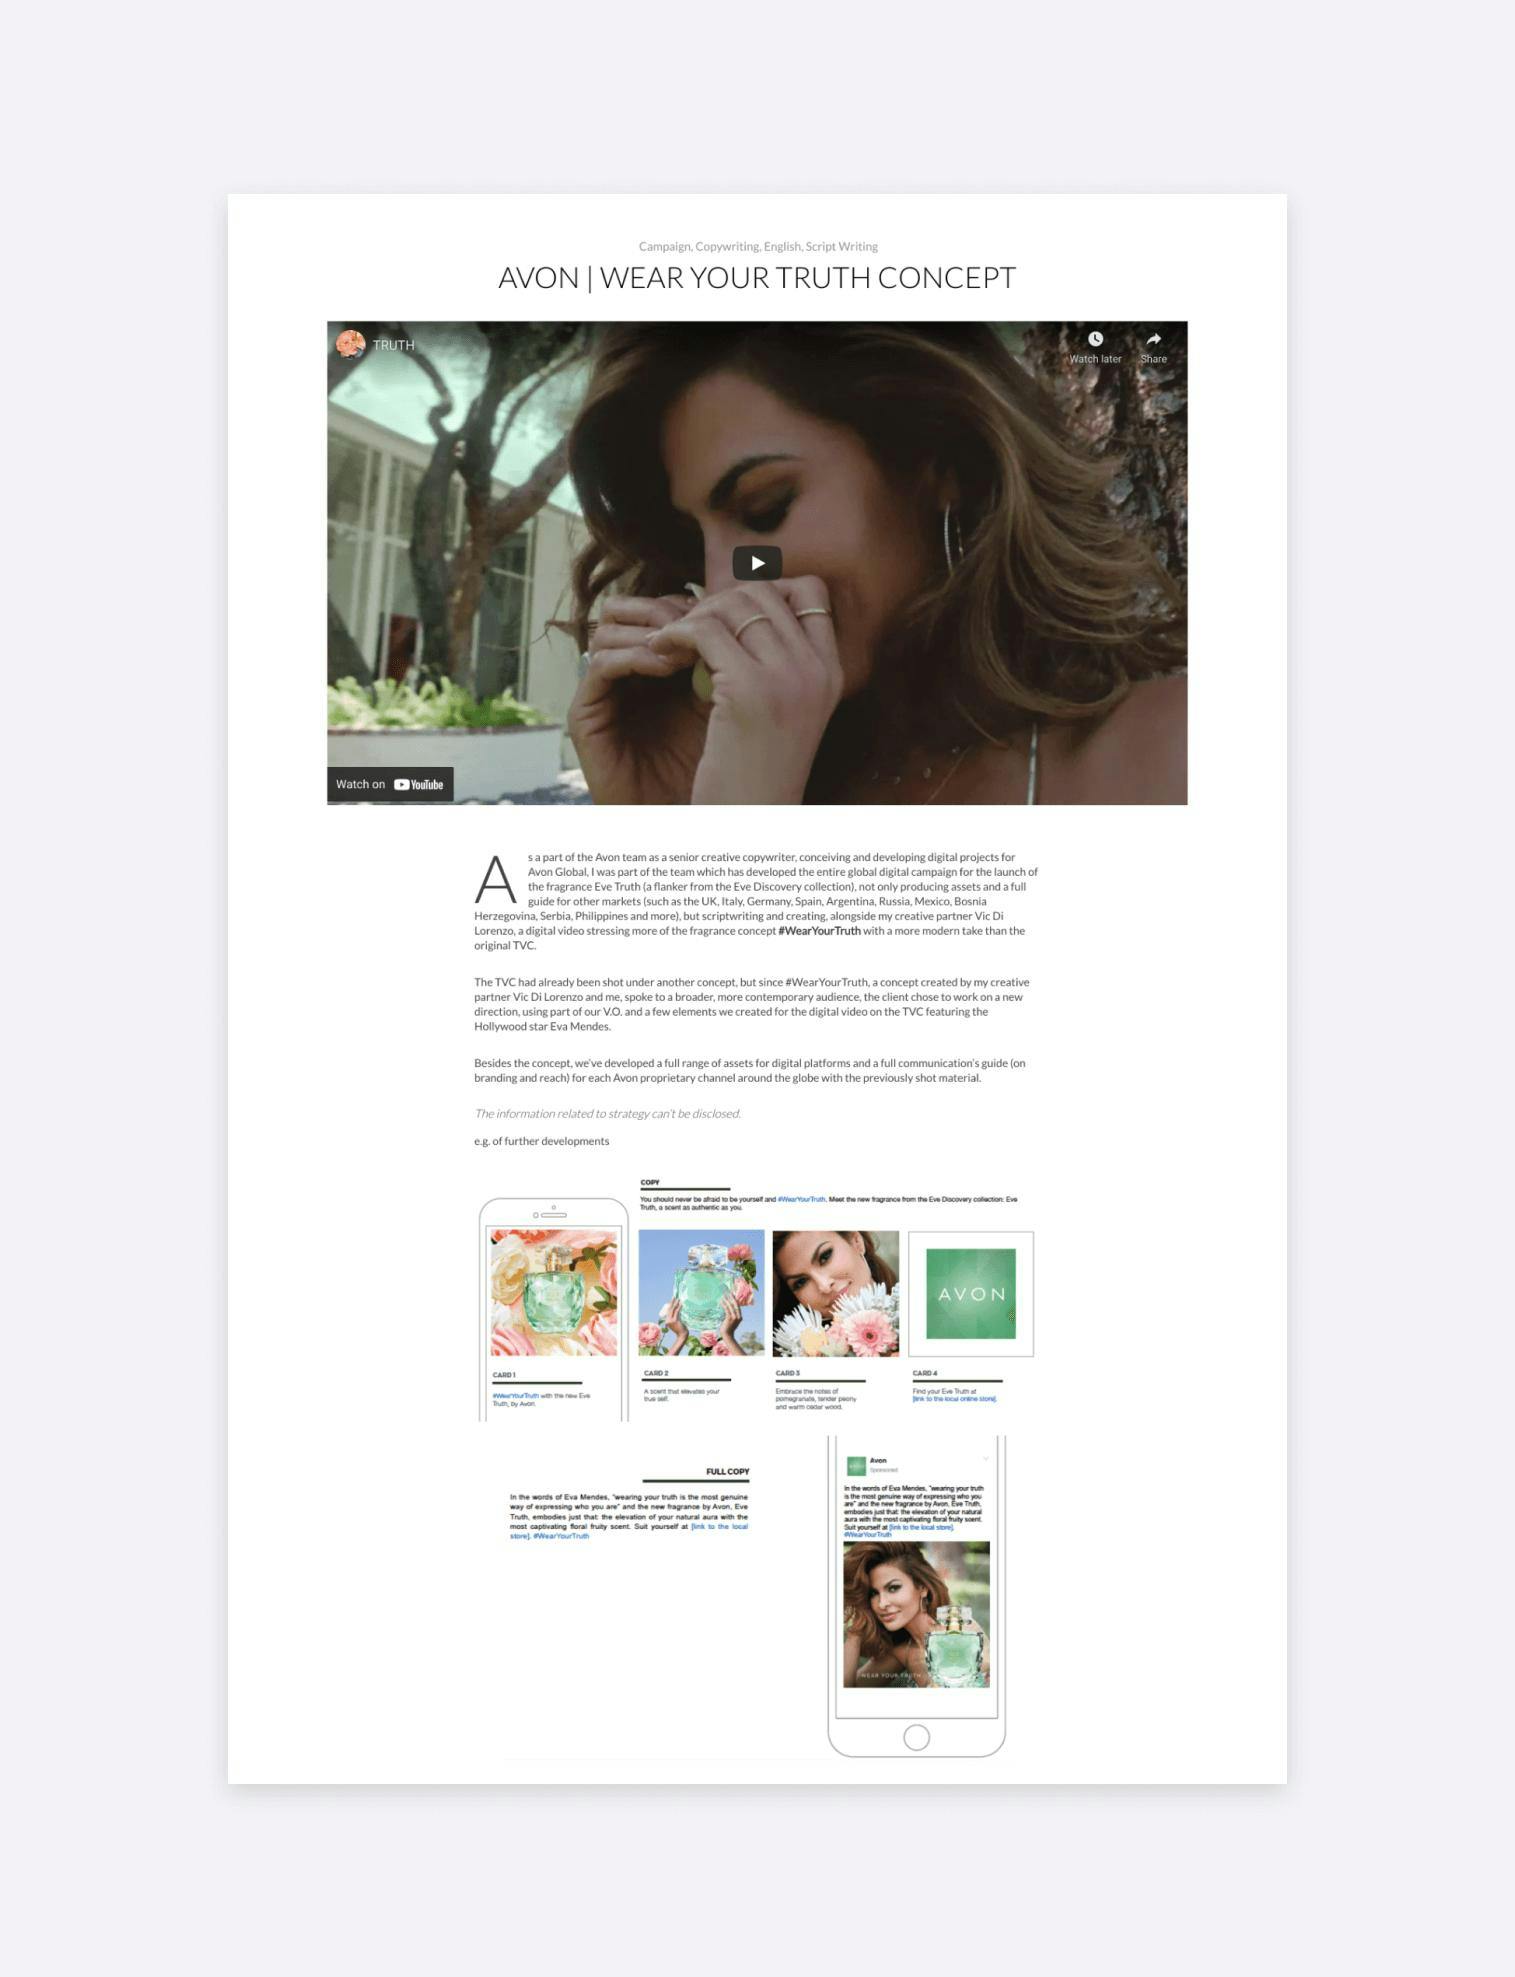 A social media case study of a project for AVON